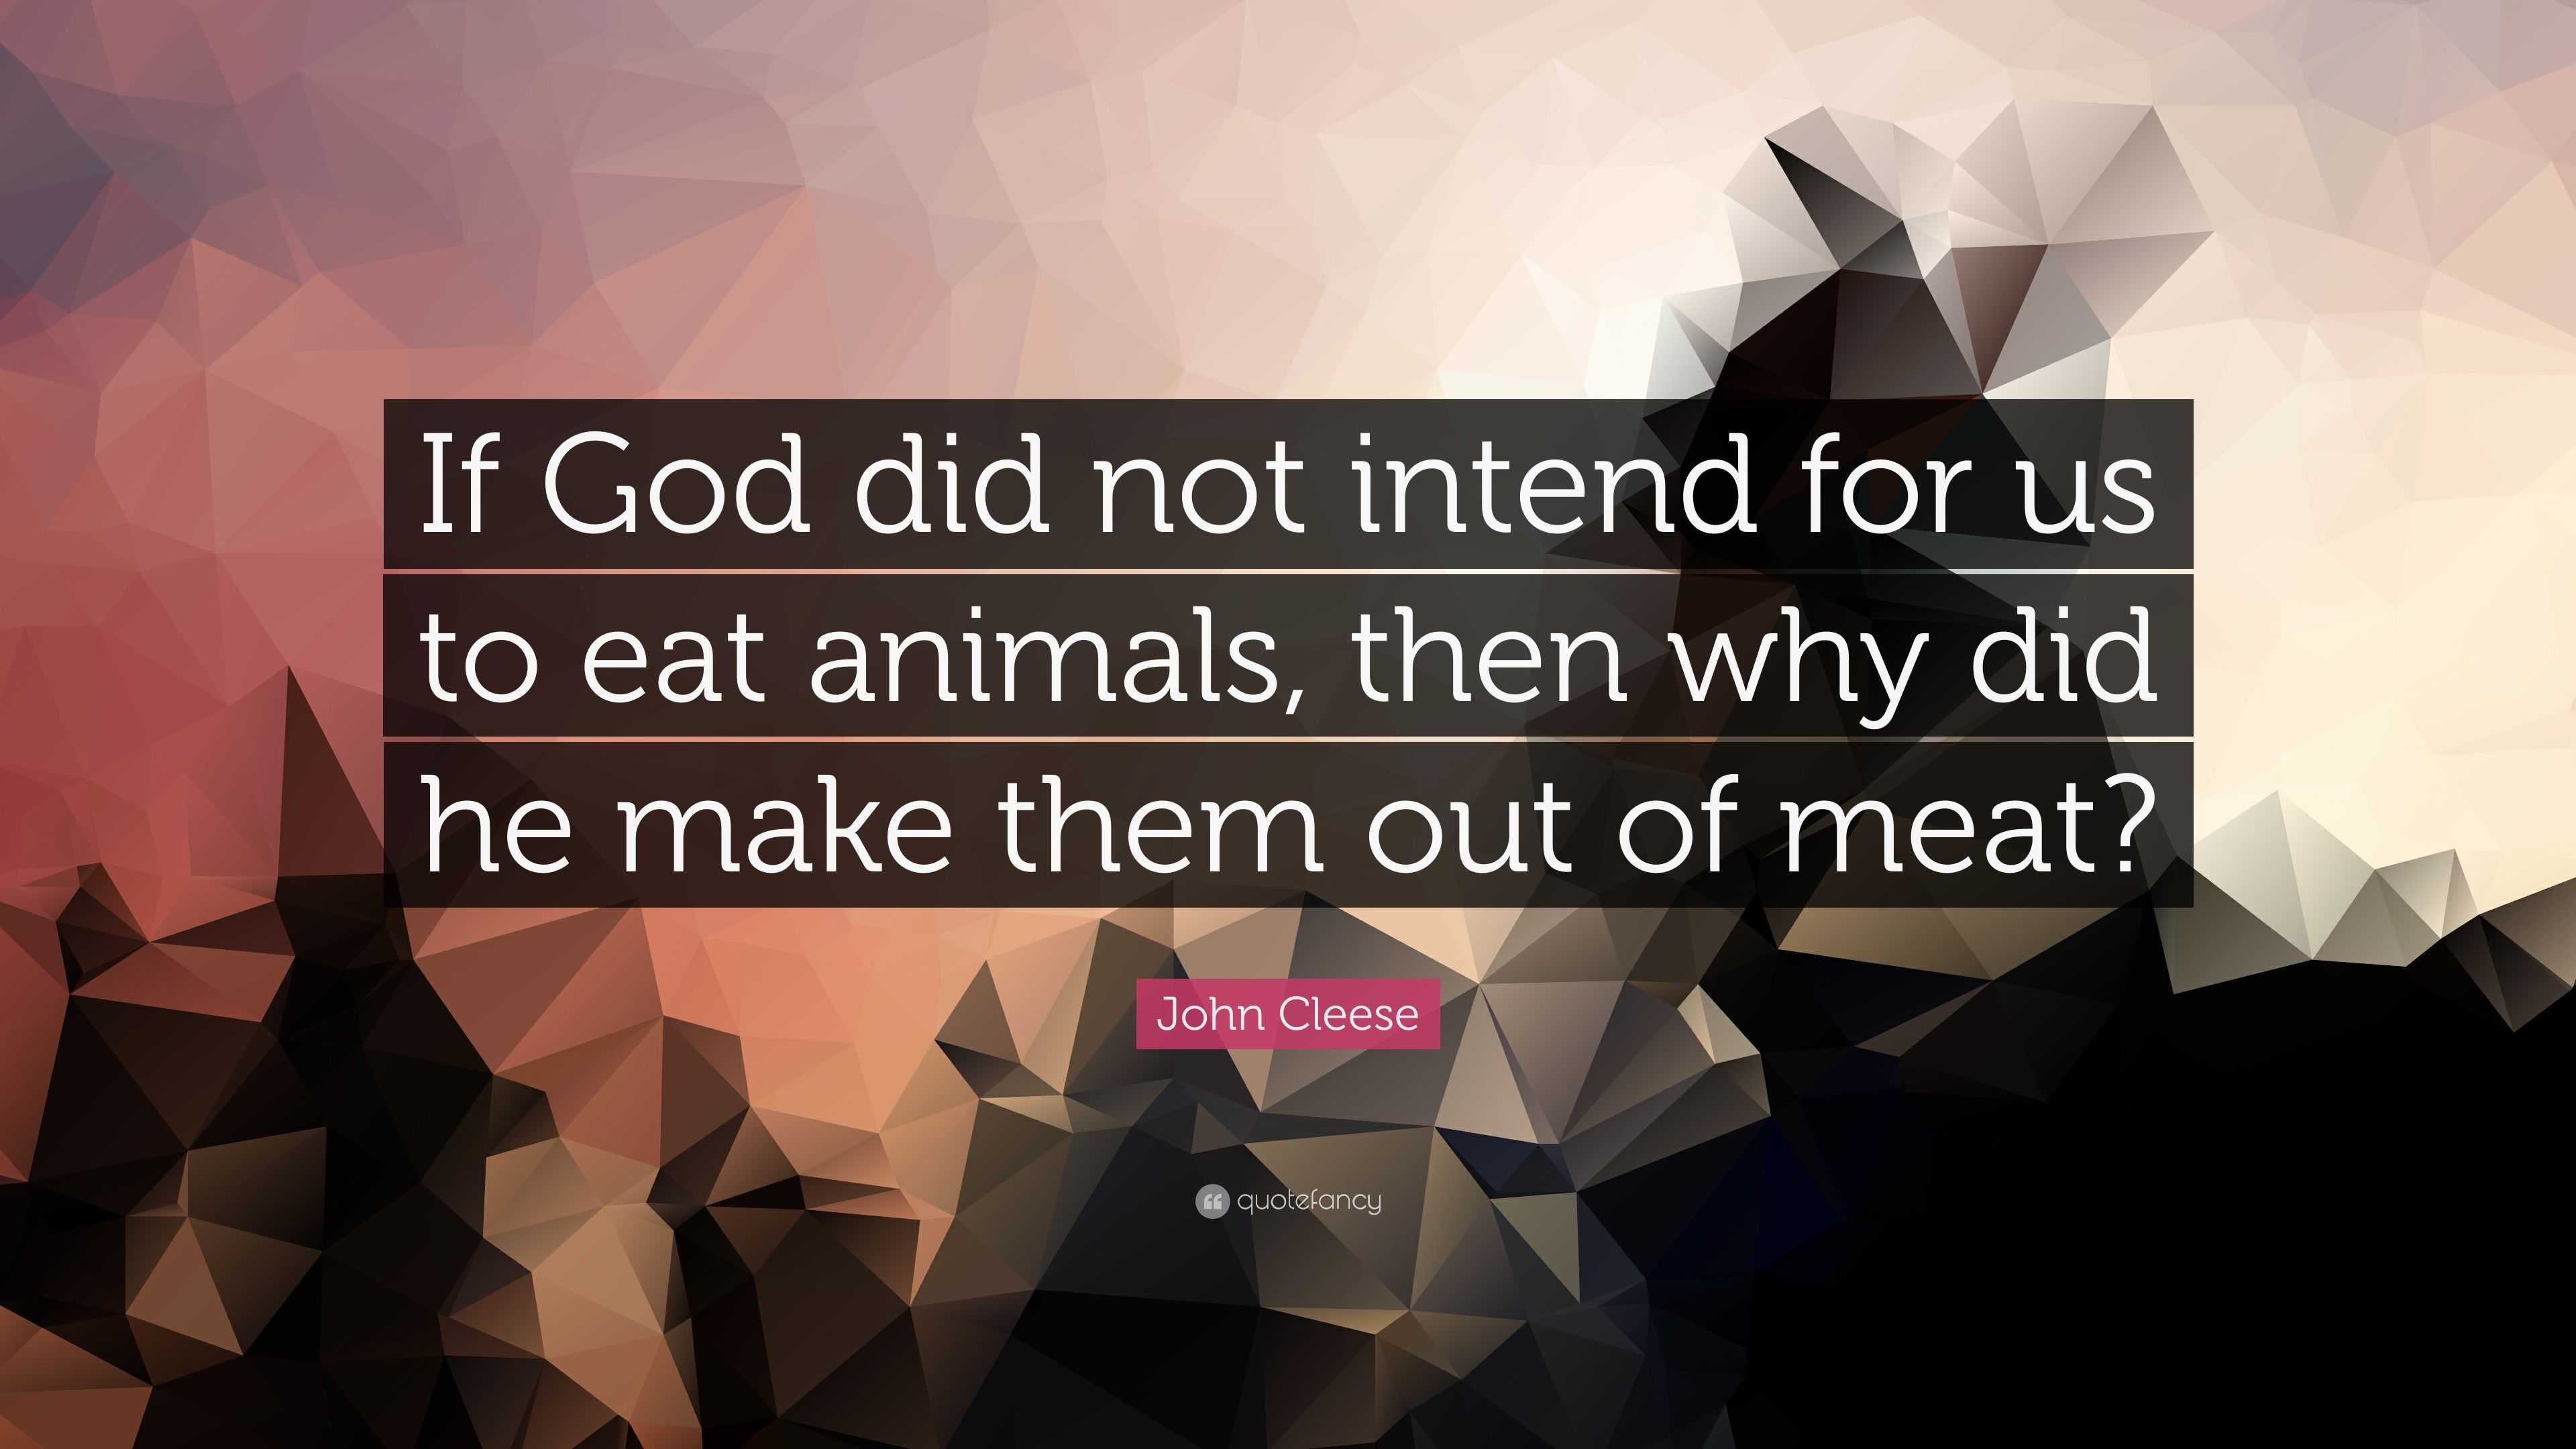 John Cleese Quote: “If God did not intend for us to eat animals, then why  did